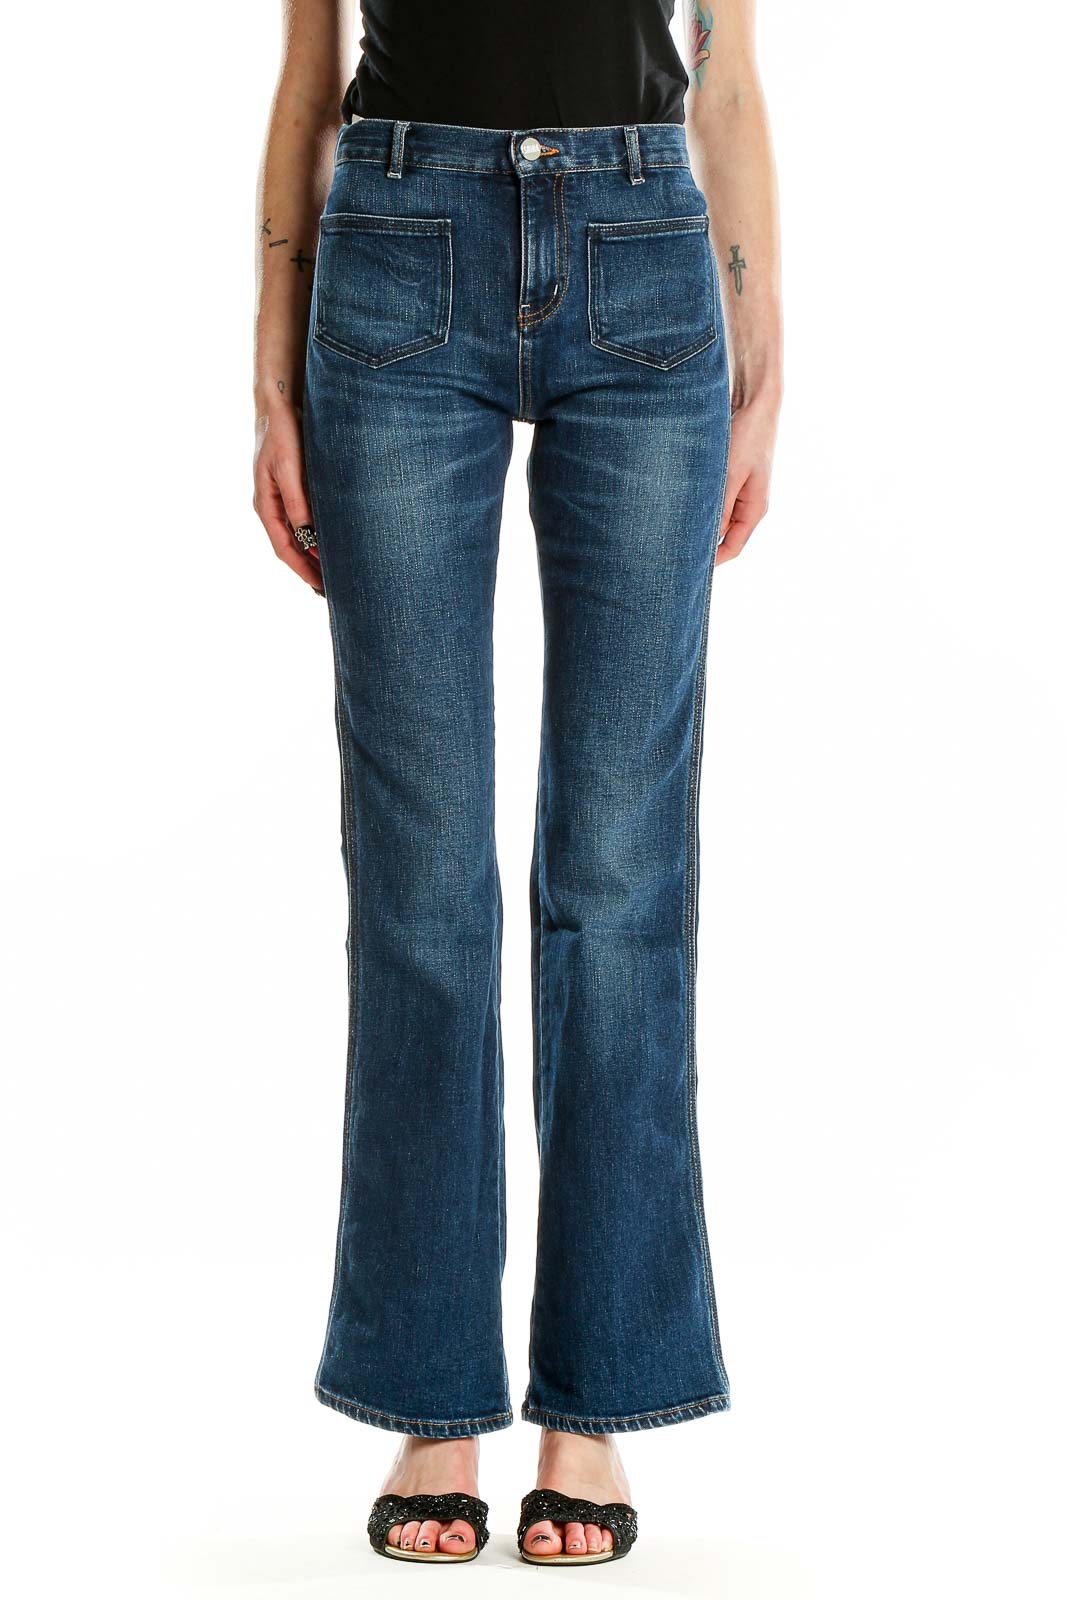 Blue High Waisted Dark Rinse Bootcut Jeans Front